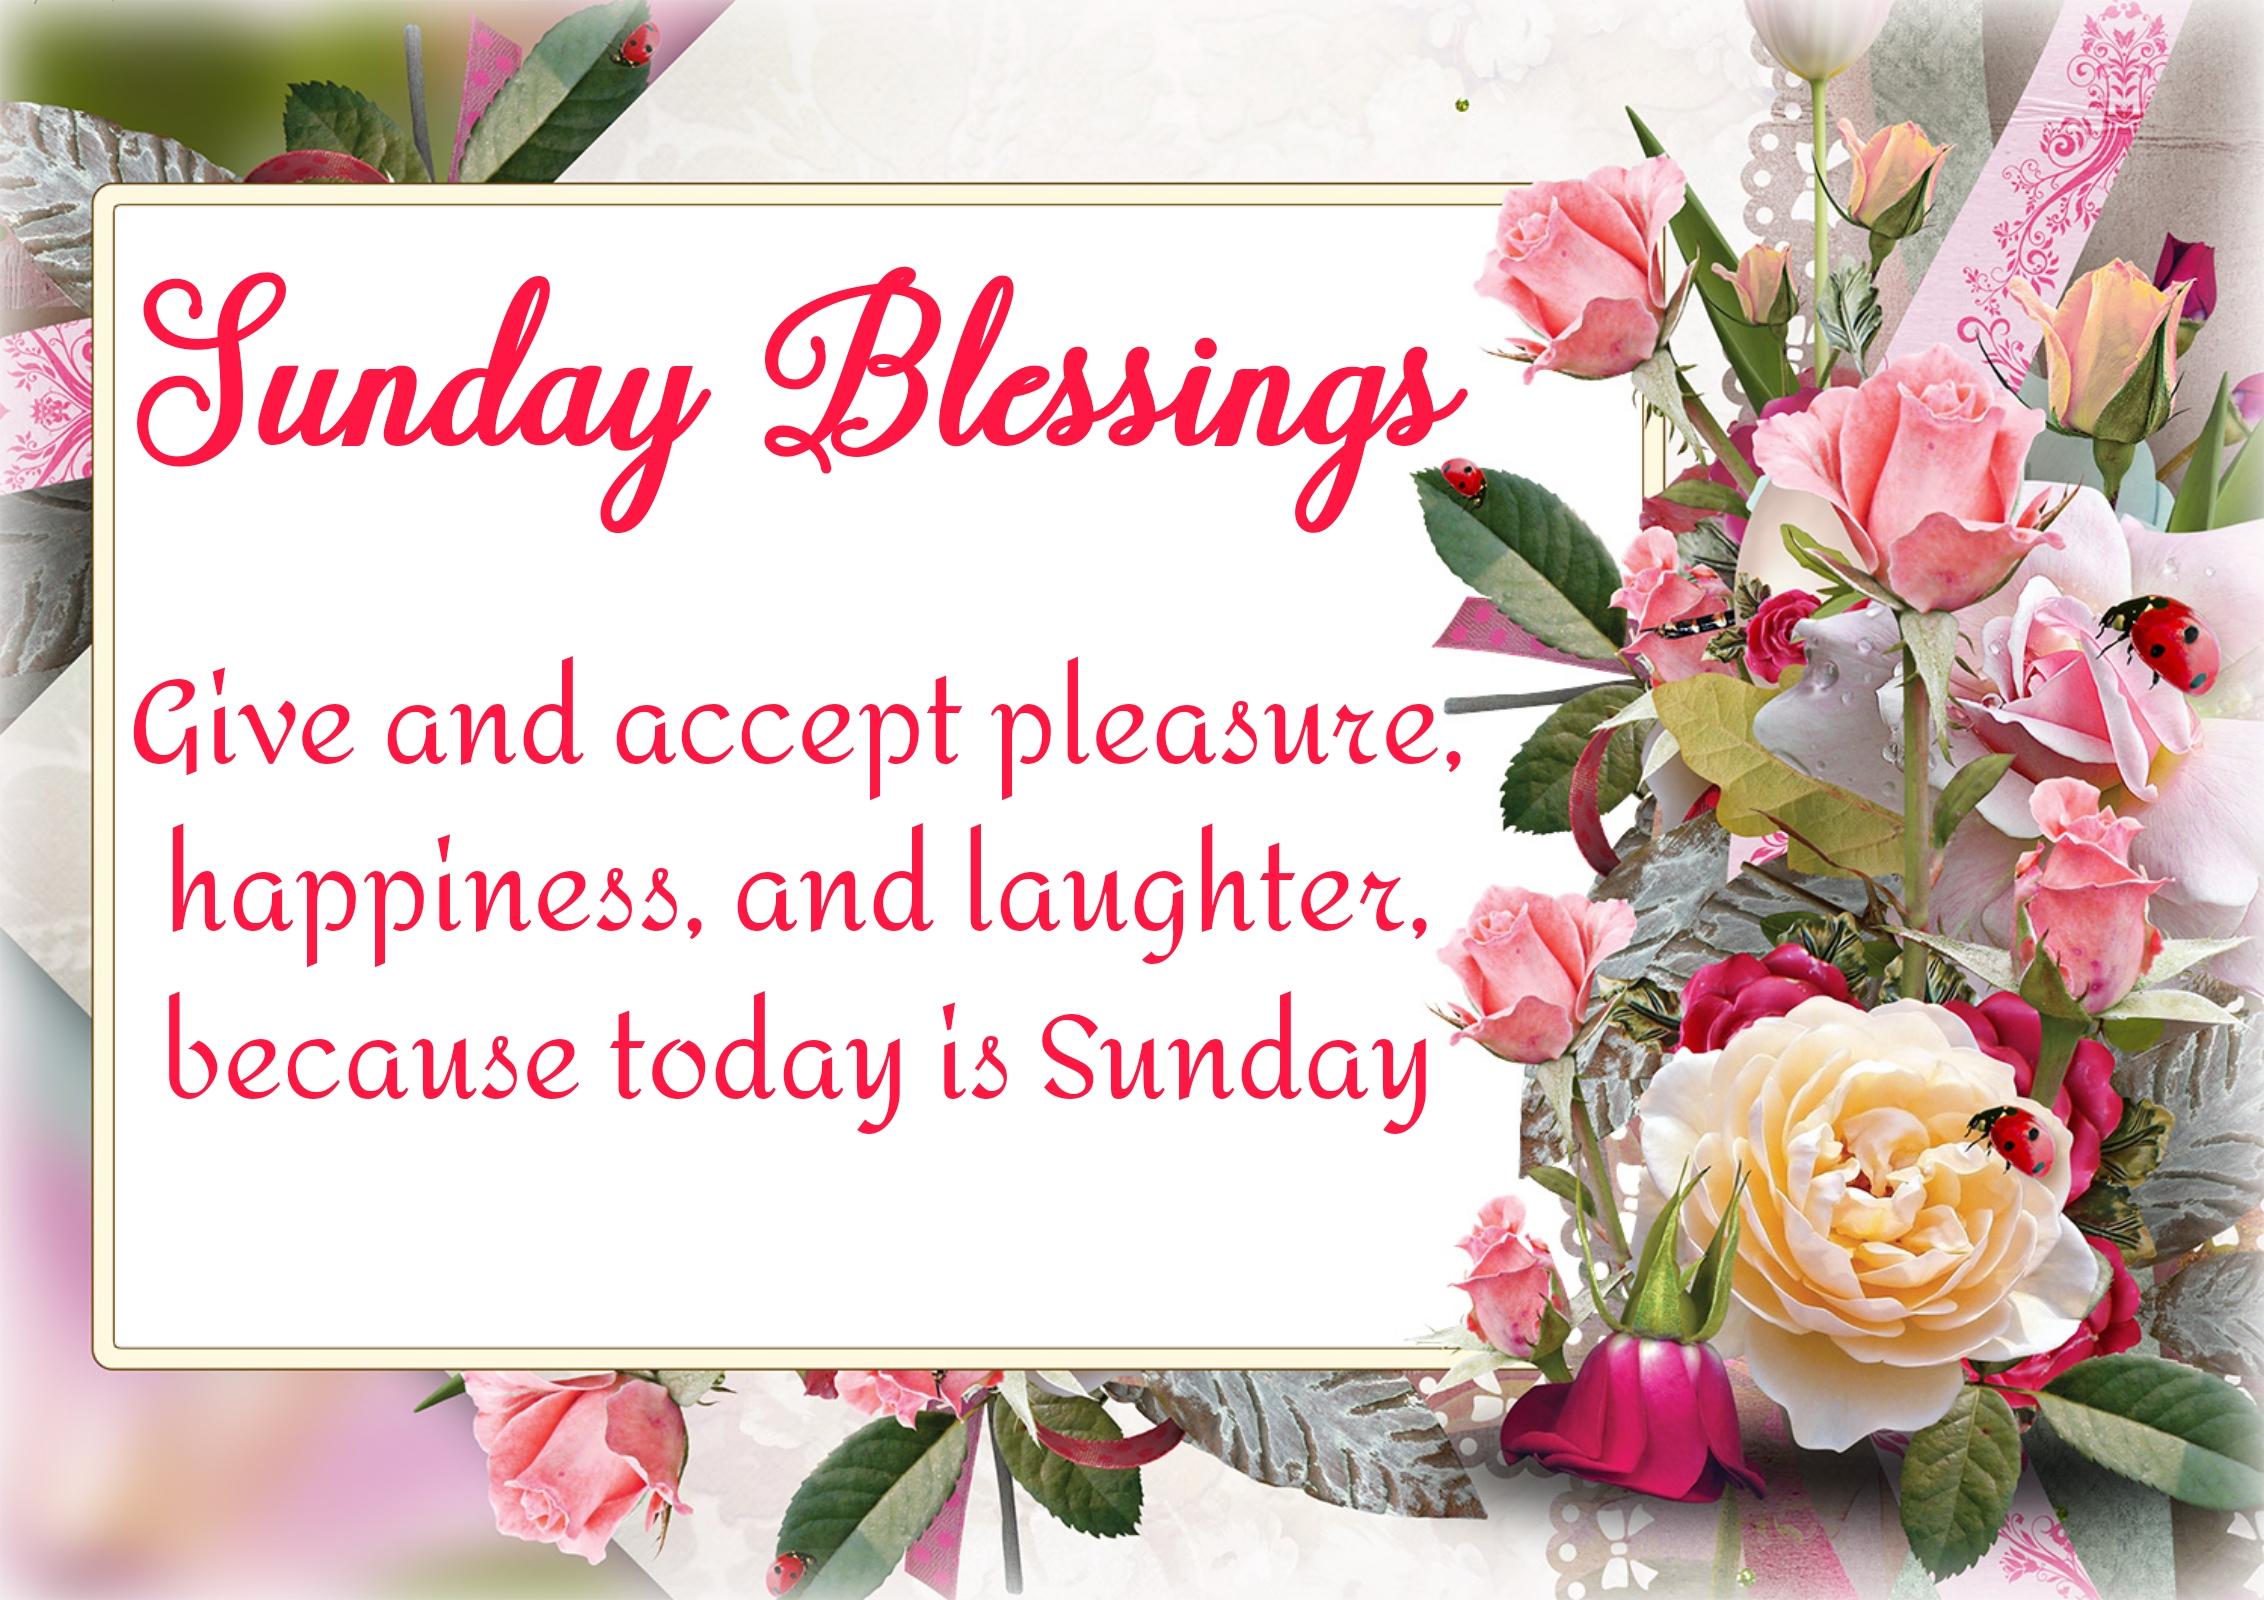 Give and accept pleasure happiness and laughter because today is Sunday!